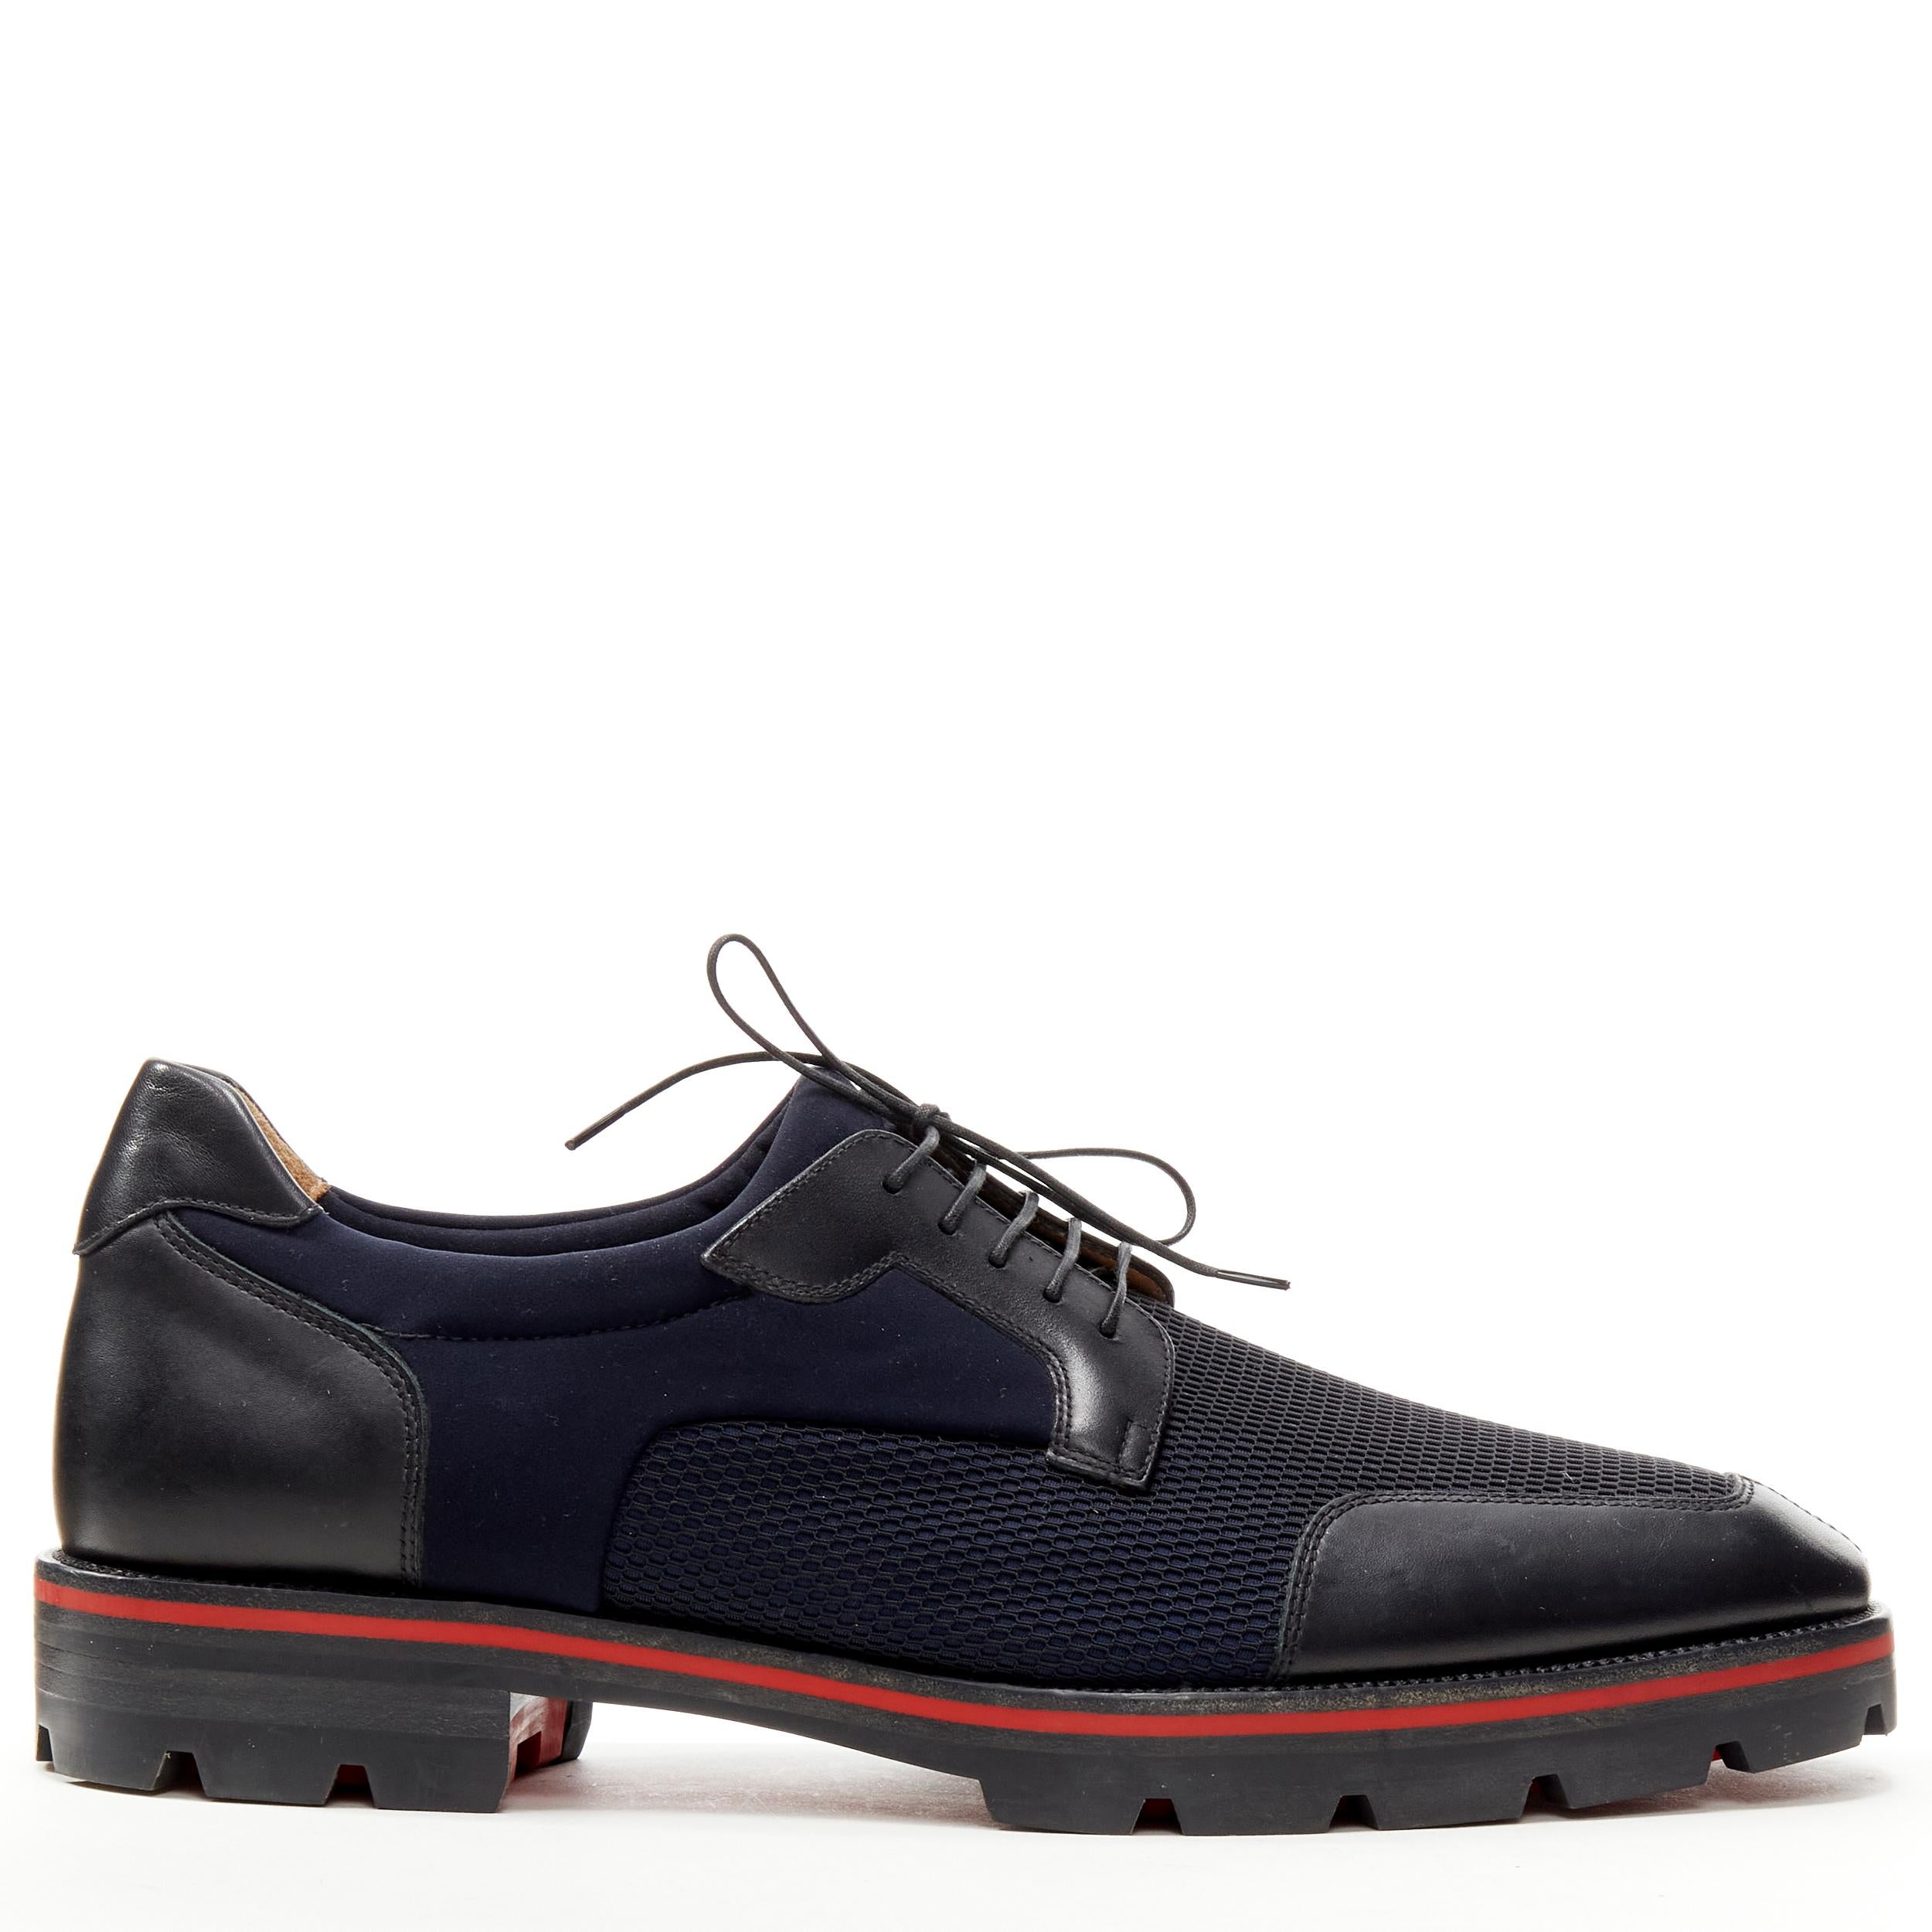 new CHRISTIAN LOUBOUTIN Mika Sky navy neoprene leather trim derby brogue EU42 
Reference: TGAS/C01117 
Brand: Christian Louboutin 
Designer: Christian Louboutin 
Model: Mika Sky 
Material: Fabric 
Color: Navy 
Pattern: Solid 
Closure: Lace Up 
Extra